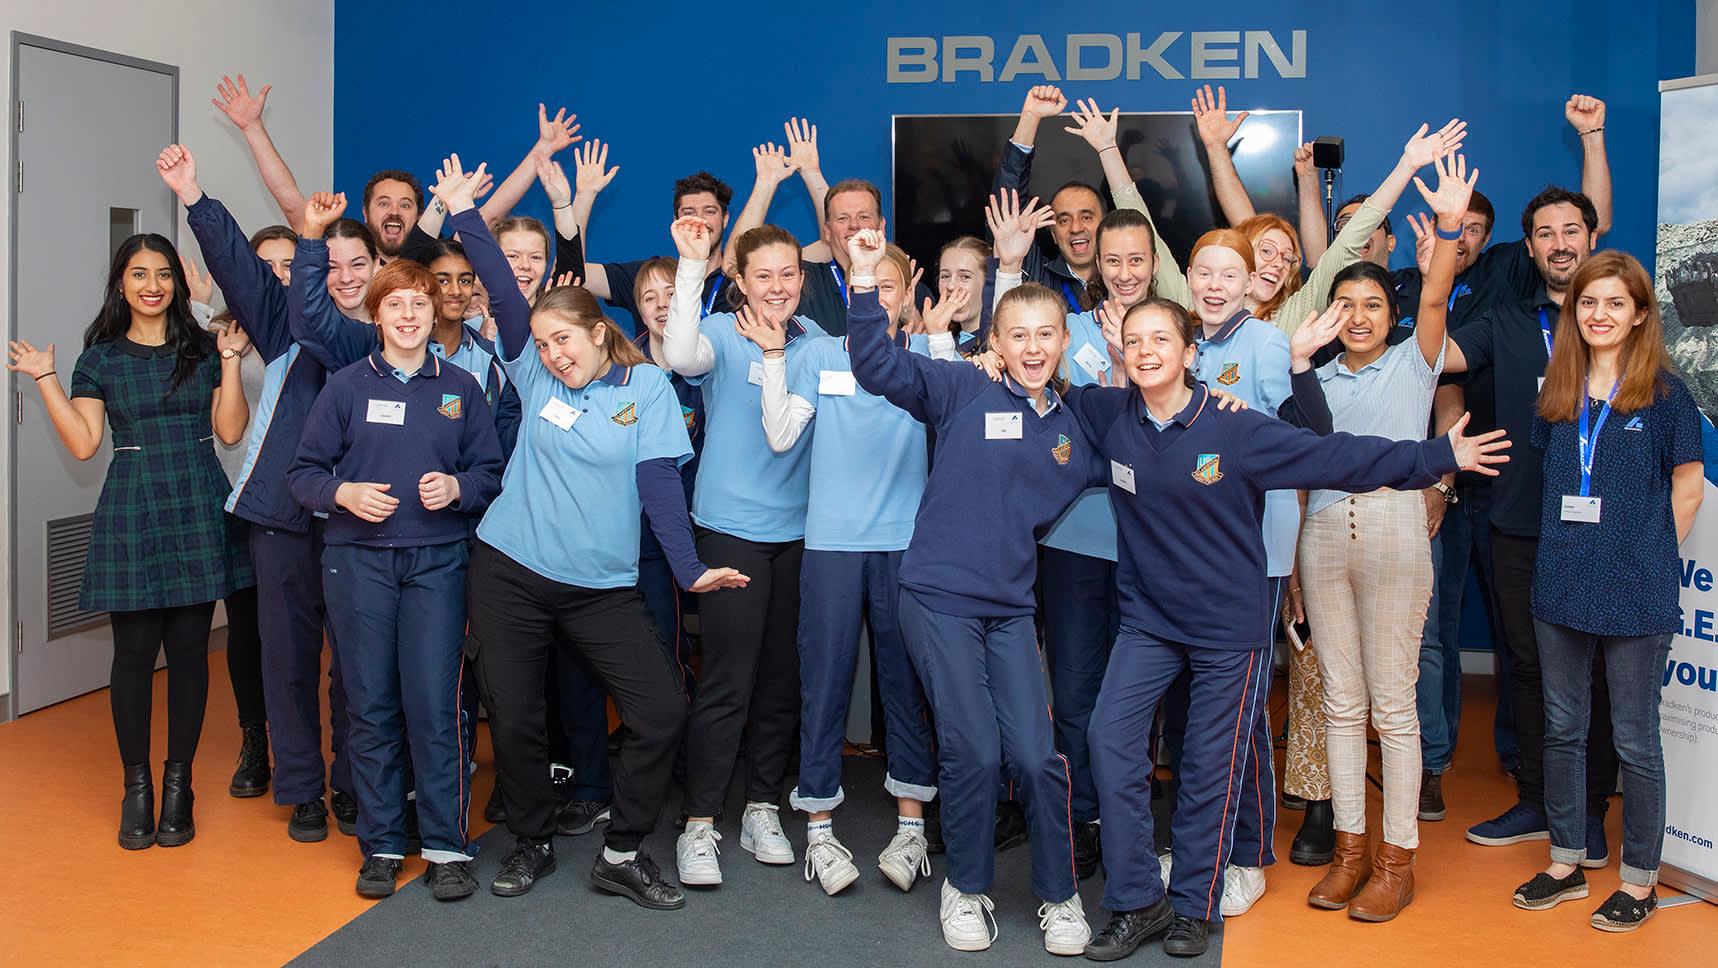 Bradken’s Innovation Centre recently hosted a visit from a group of female students from Lambton High School as part of our involvement with the University of Newcastle’s HunterWISE STEM Outreach program.